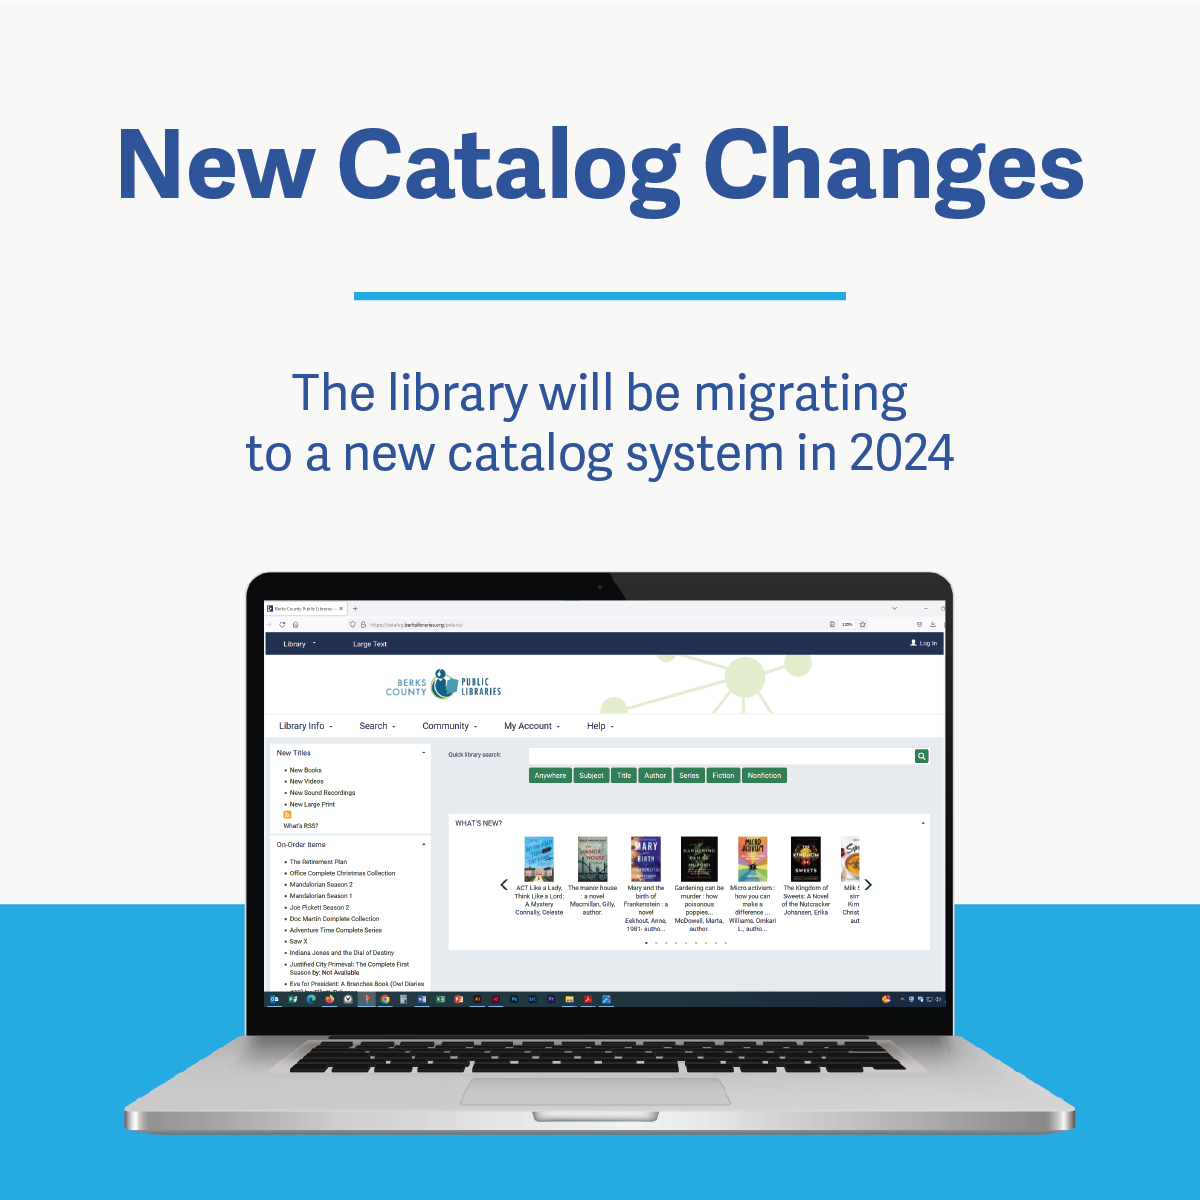 Laptop screen showing the online library catalog. Text reads: "New Catalog Changes."